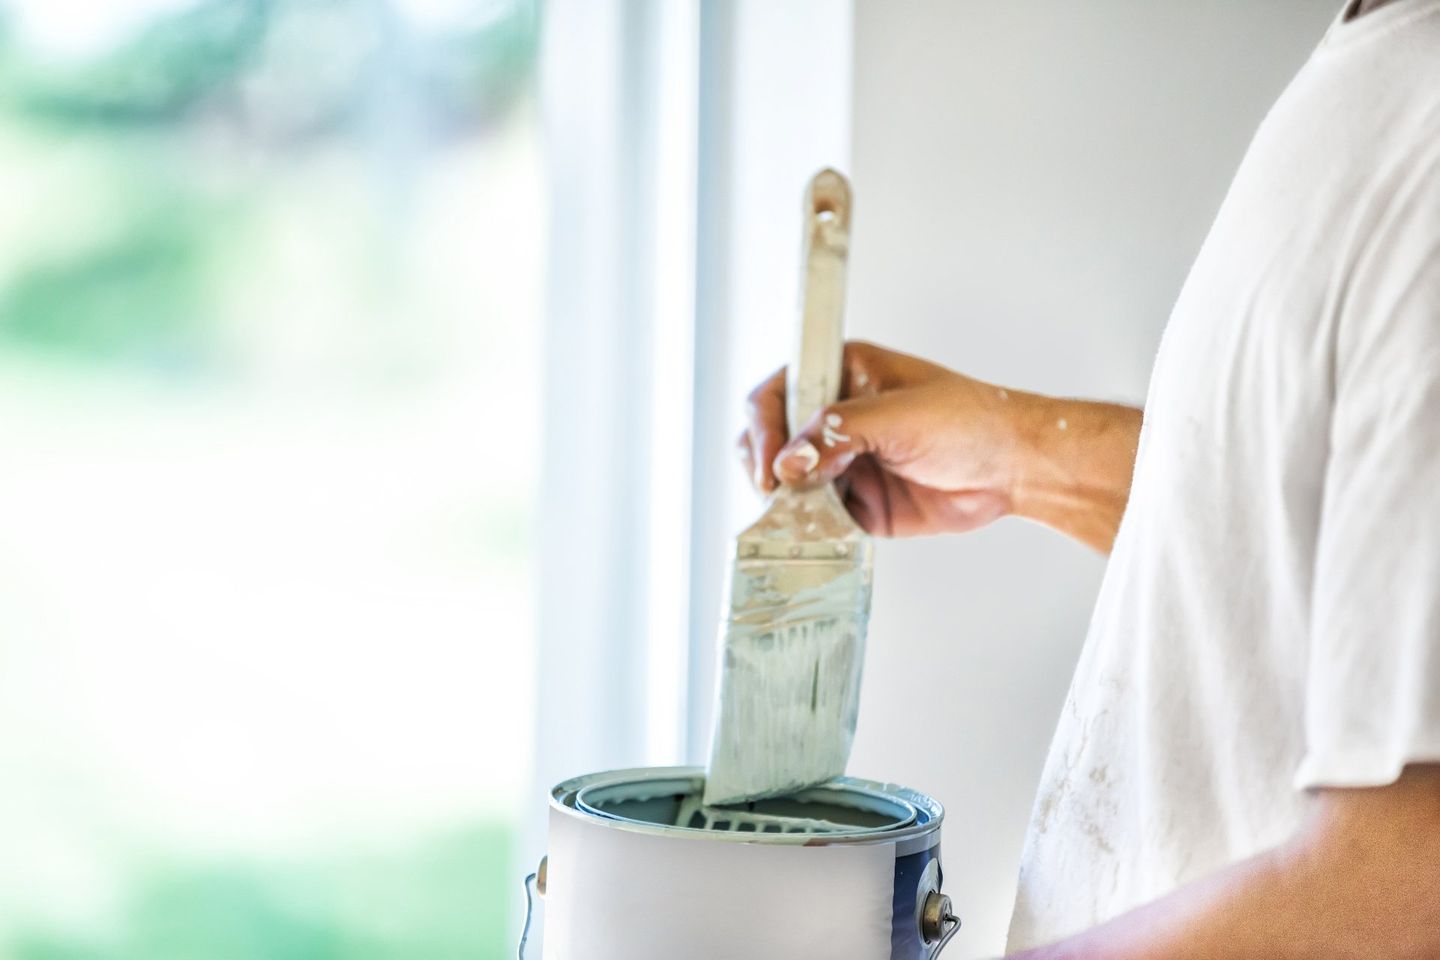 A house painter dips his brush into a can of paint